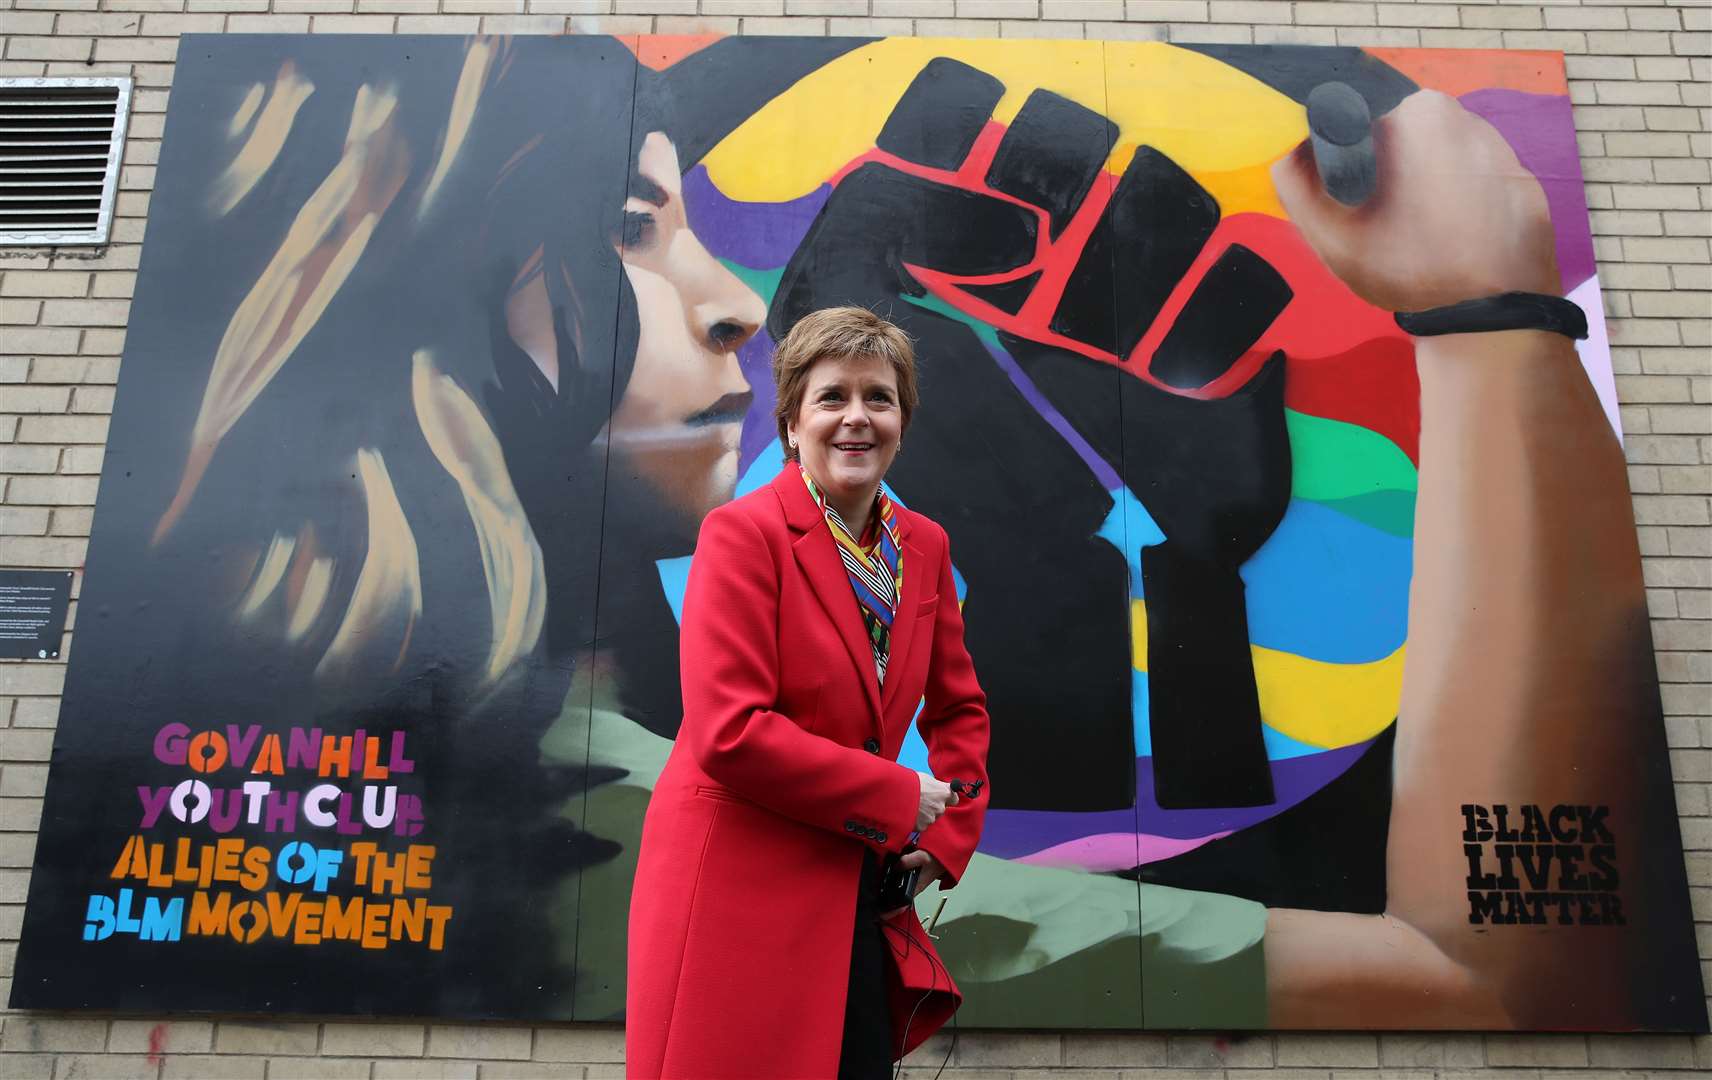 Ms Sturgeon highlighted the school meals proposals while campaigning in Glasgow (Andrew Milligan/PA)